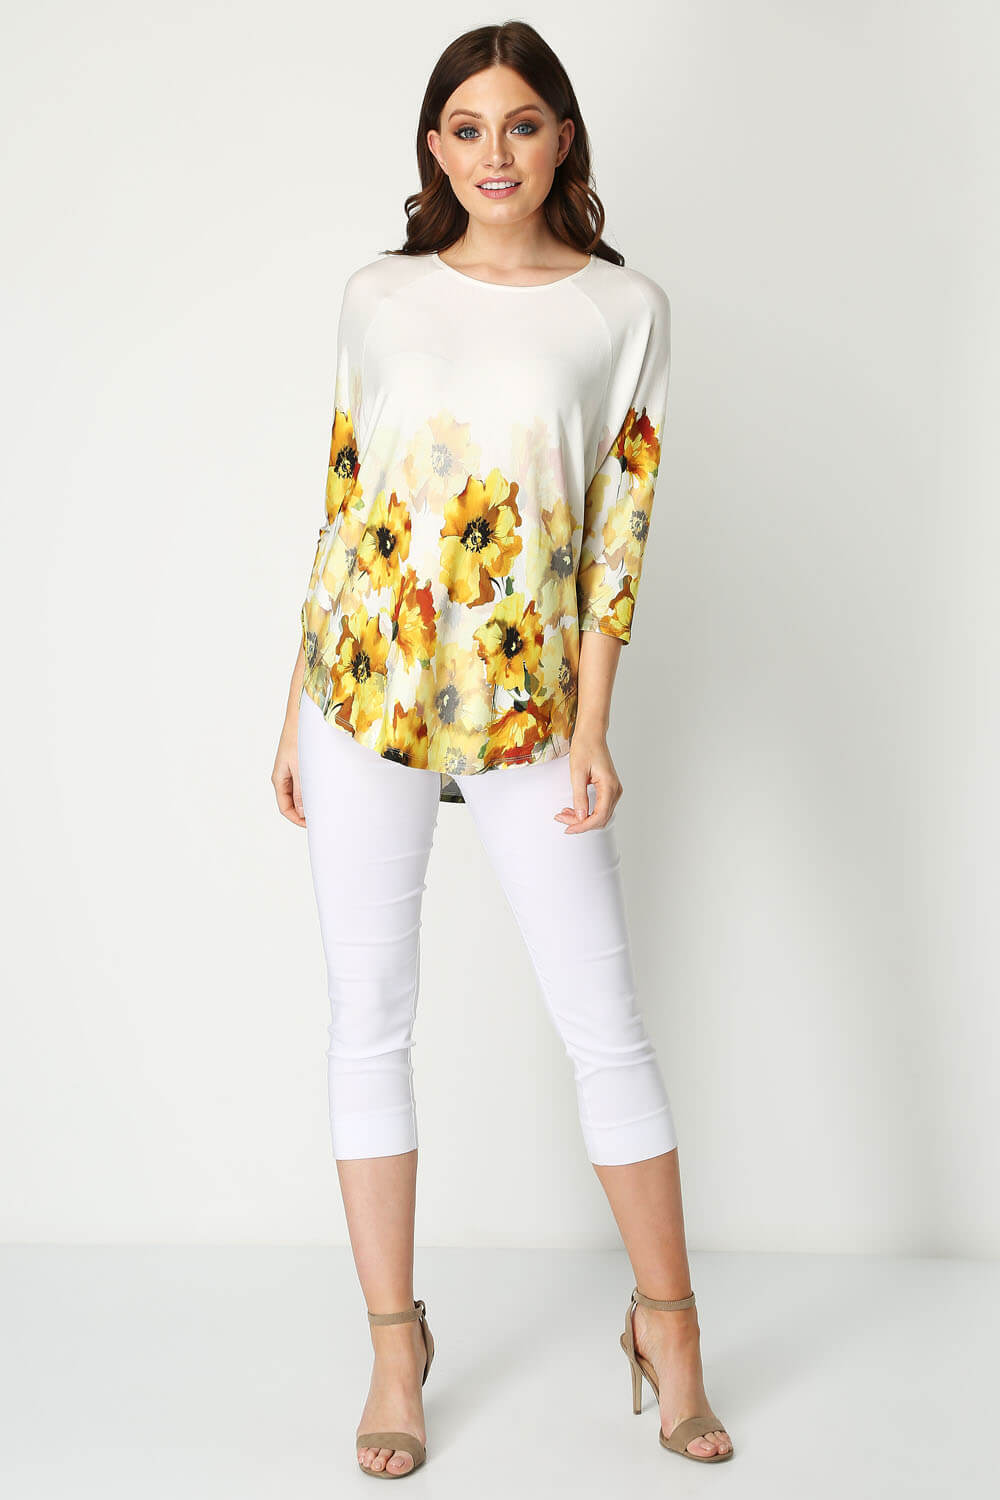 Yellow Floral Border Print 3/4 Sleeve Top, Image 2 of 8